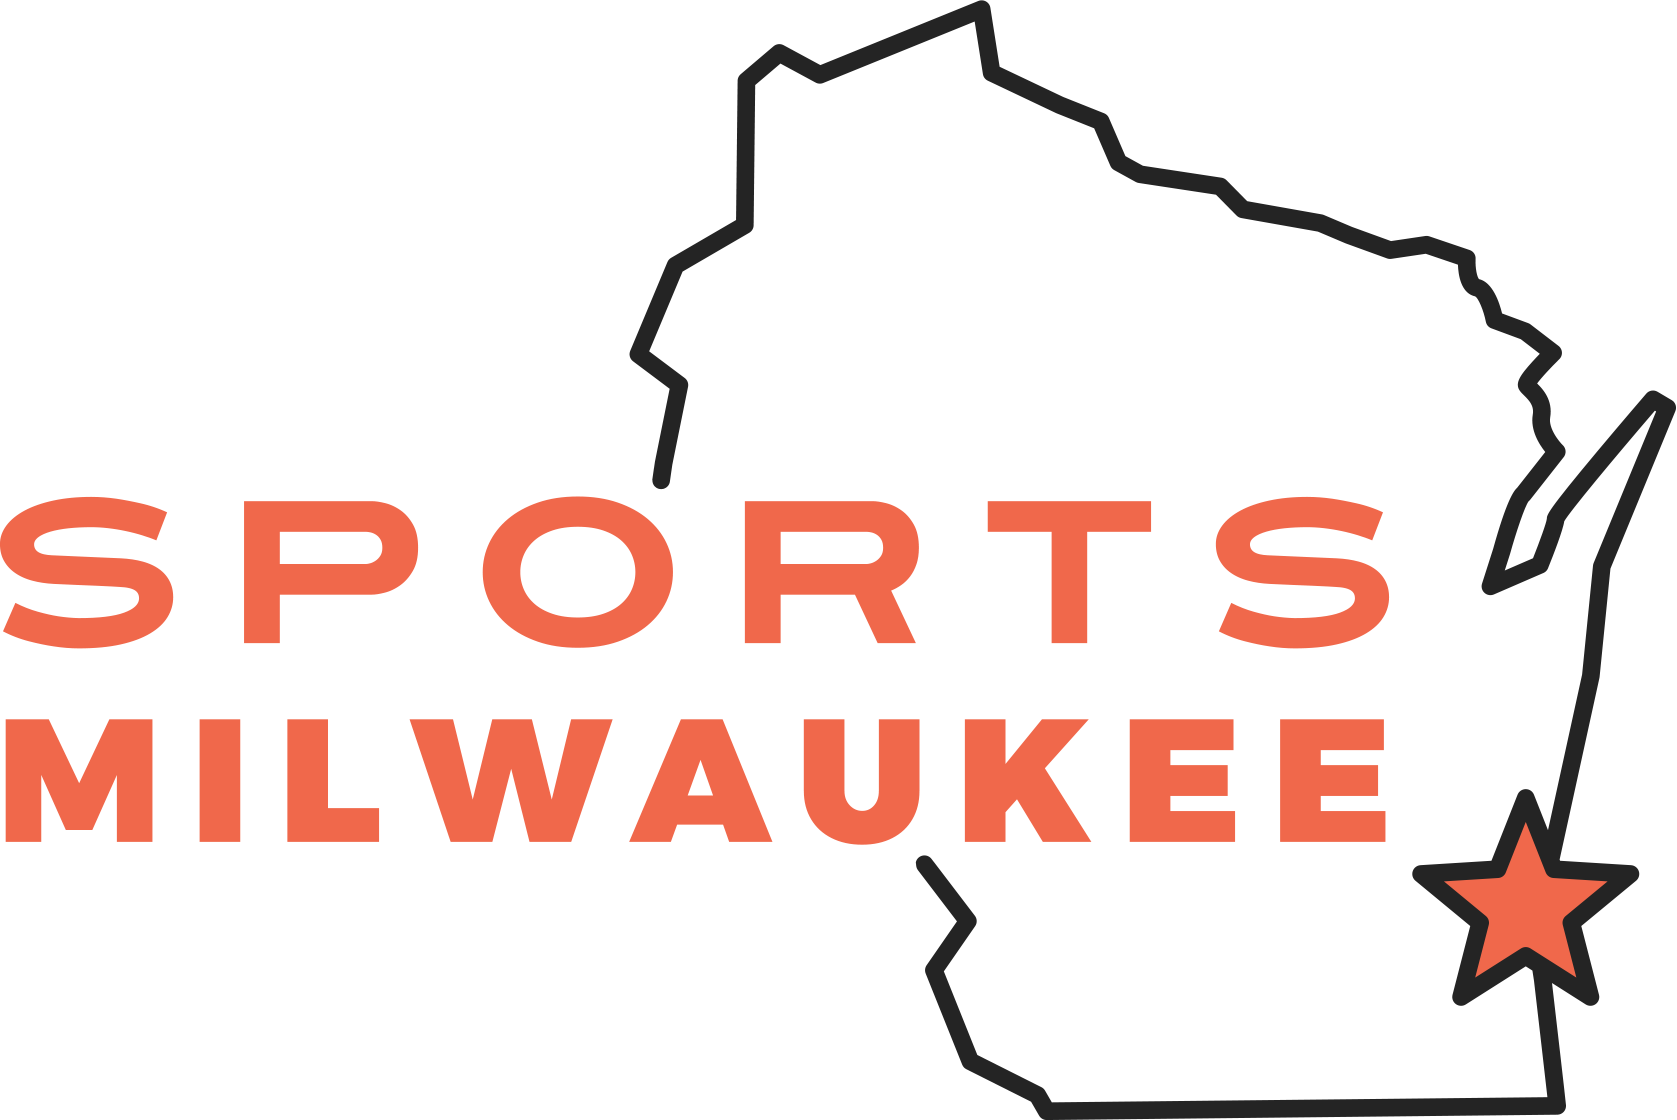 sports milwaukee over an outline of wisconsin with a star over milwaukee